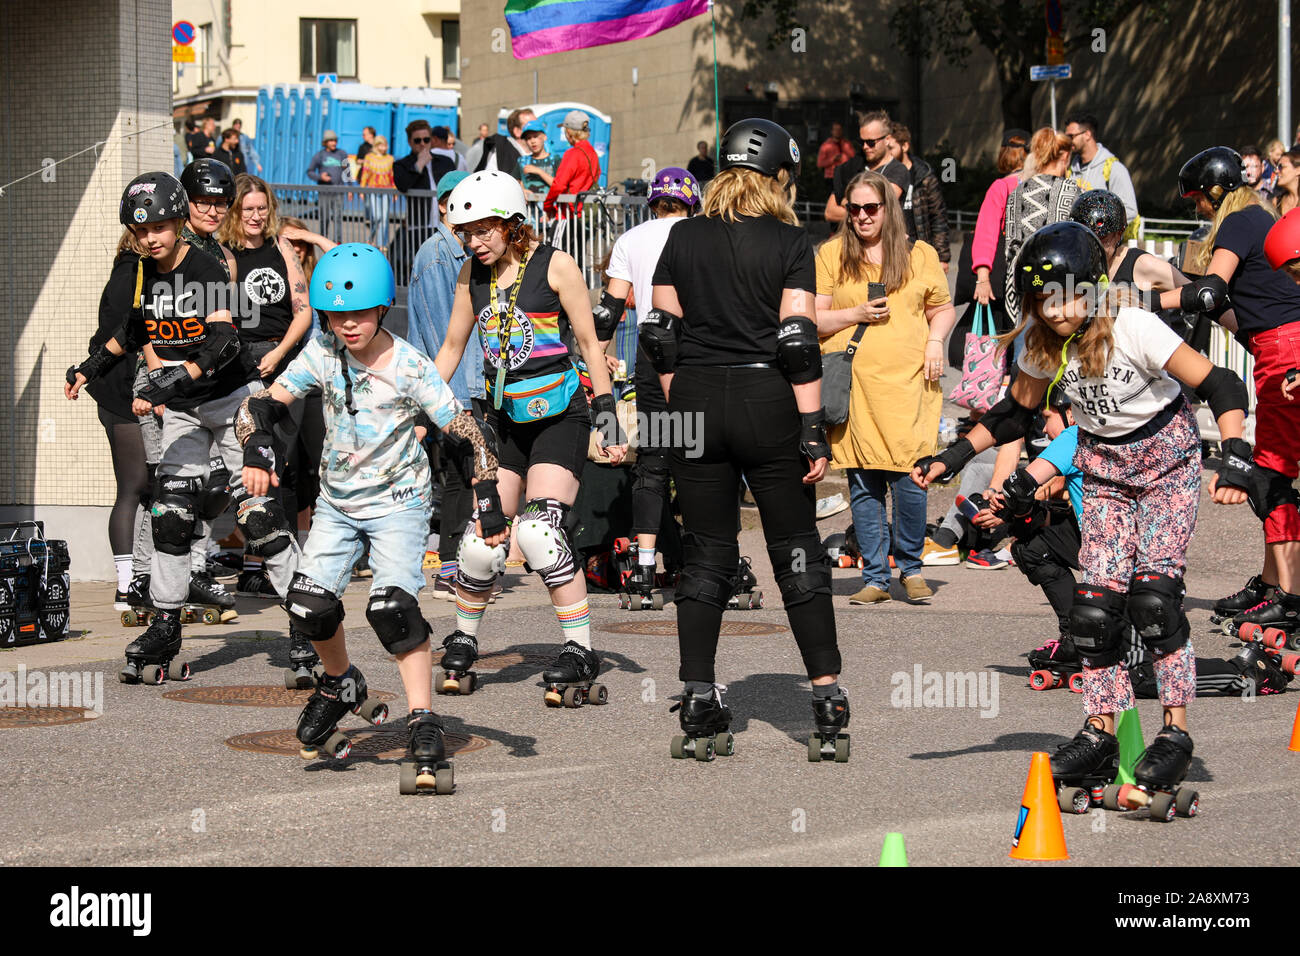 Free roller skating lessons at Kallio Block Party community event in Helsinki, Finland Stock Photo